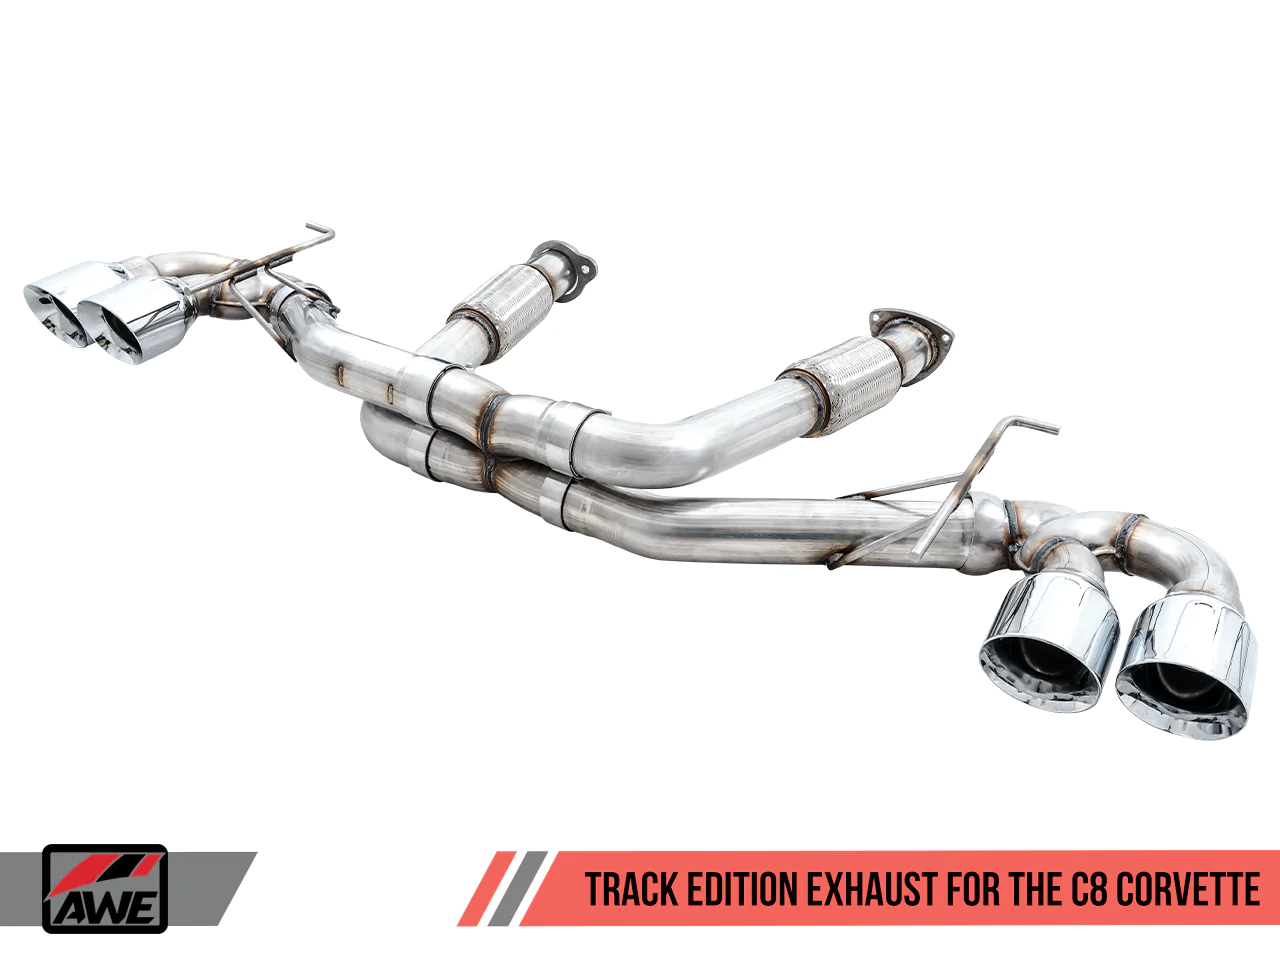 AWE Track-Edition Exhaust